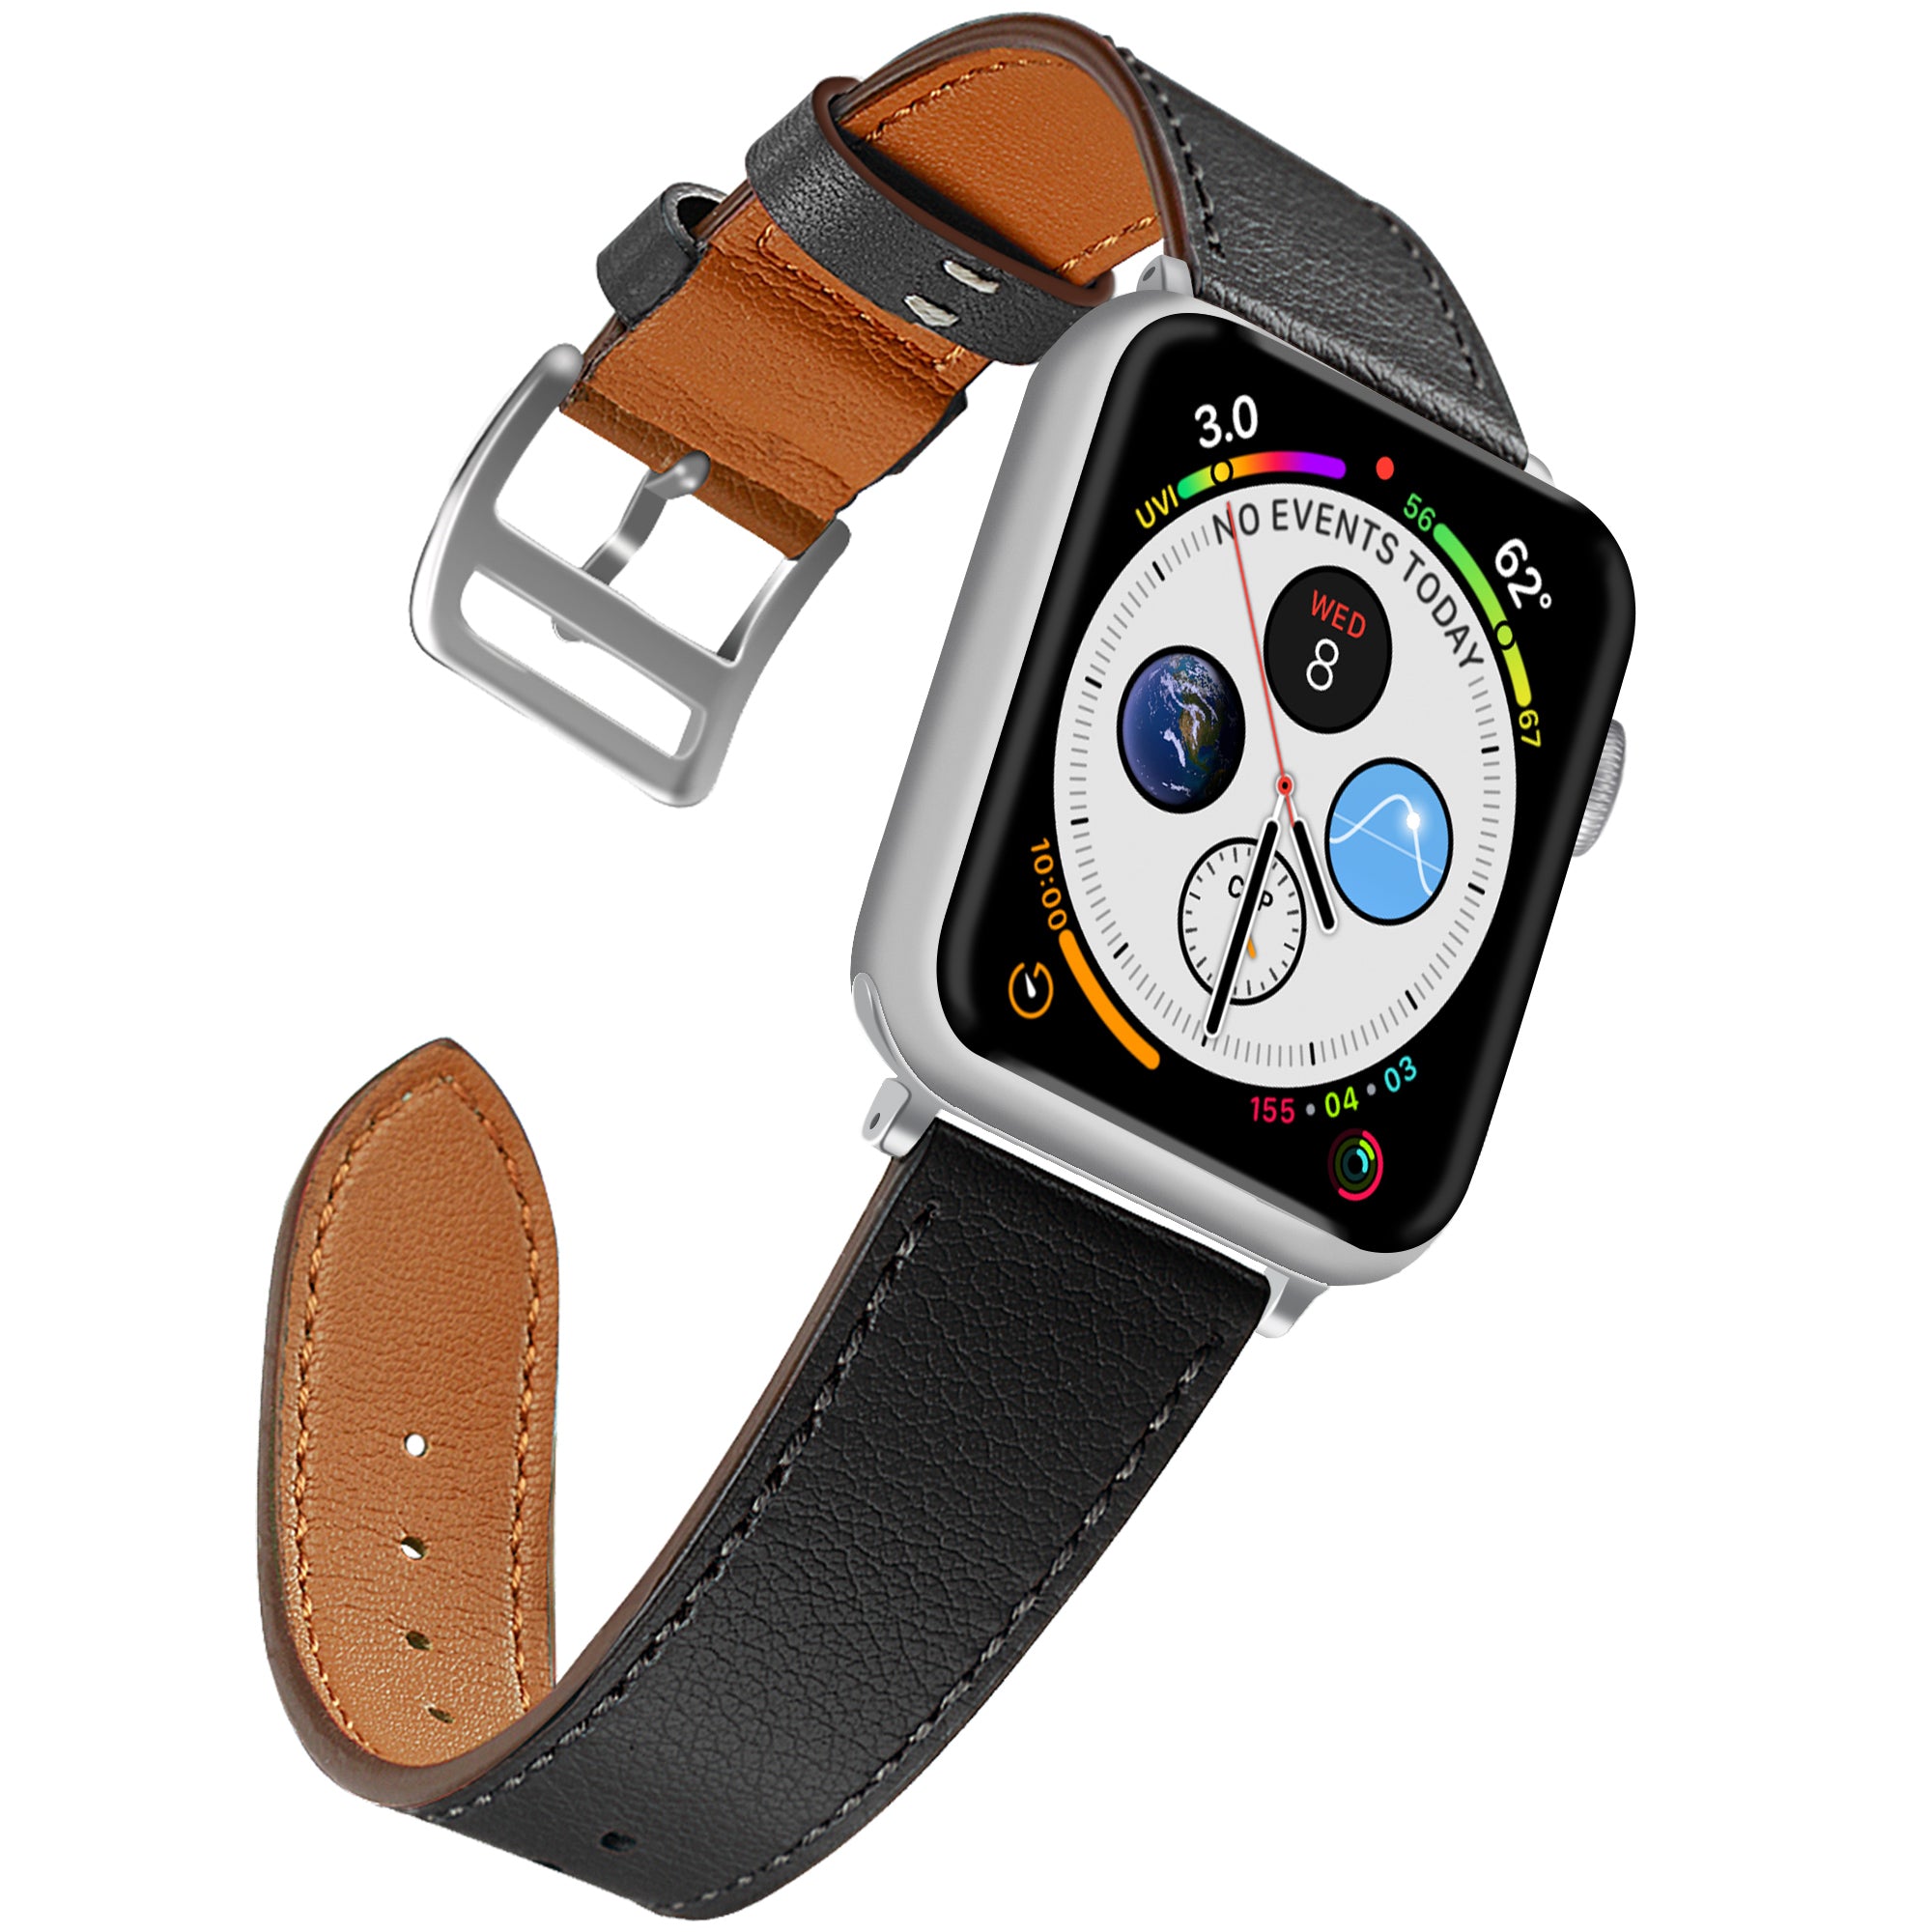 High Quality Apple Watch Leather, Leather Sports Strap